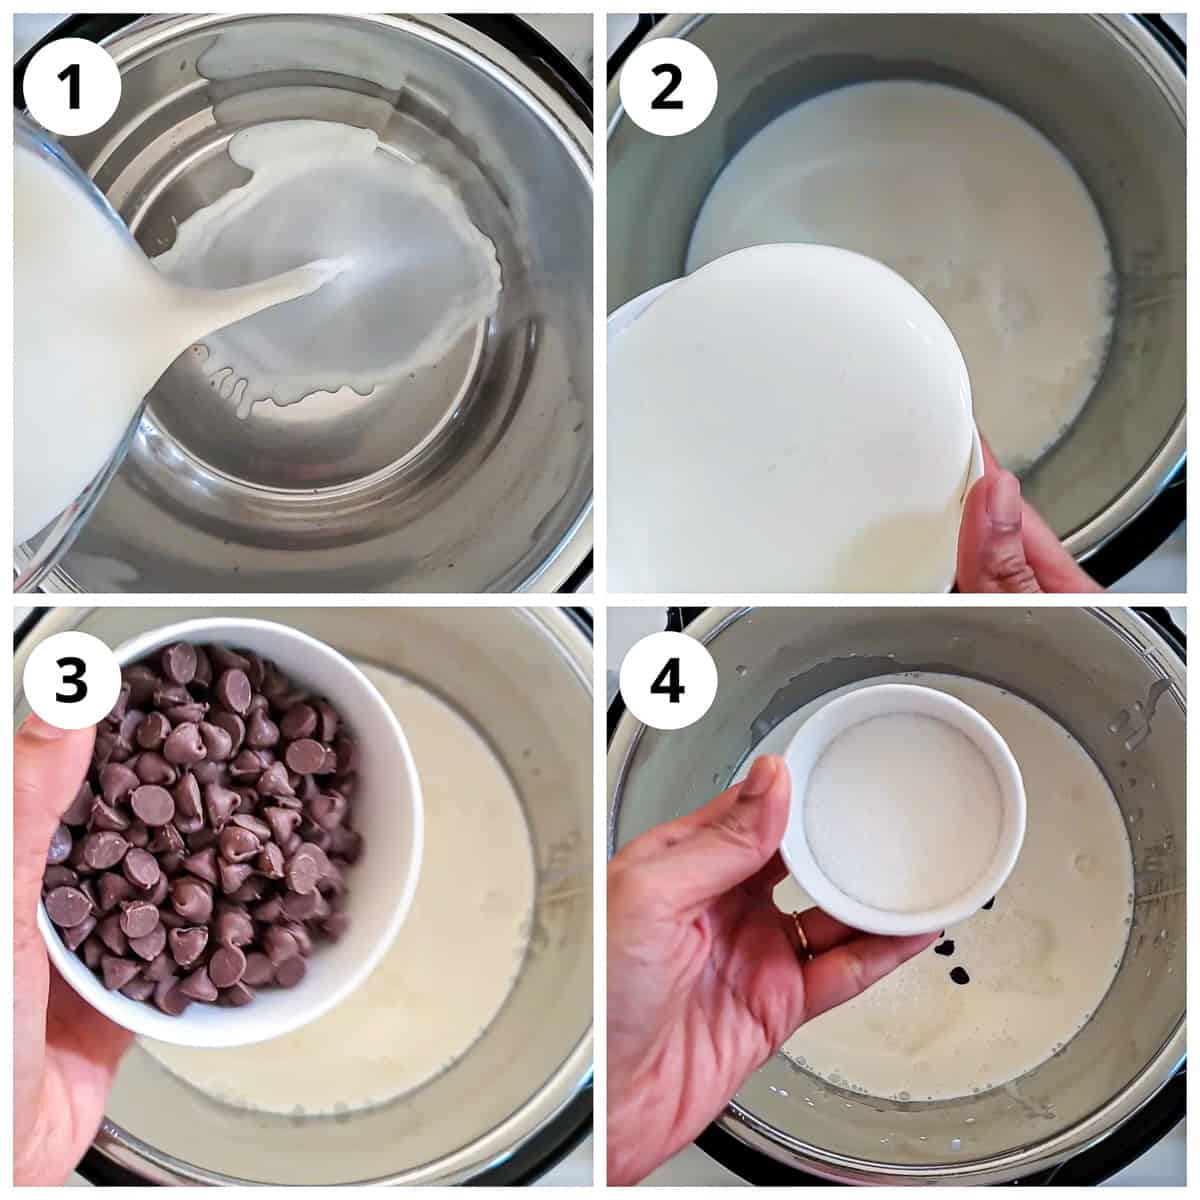 Steps for adding milk, cream, chocolate chips and sugar to Instant pot for hot chocolate